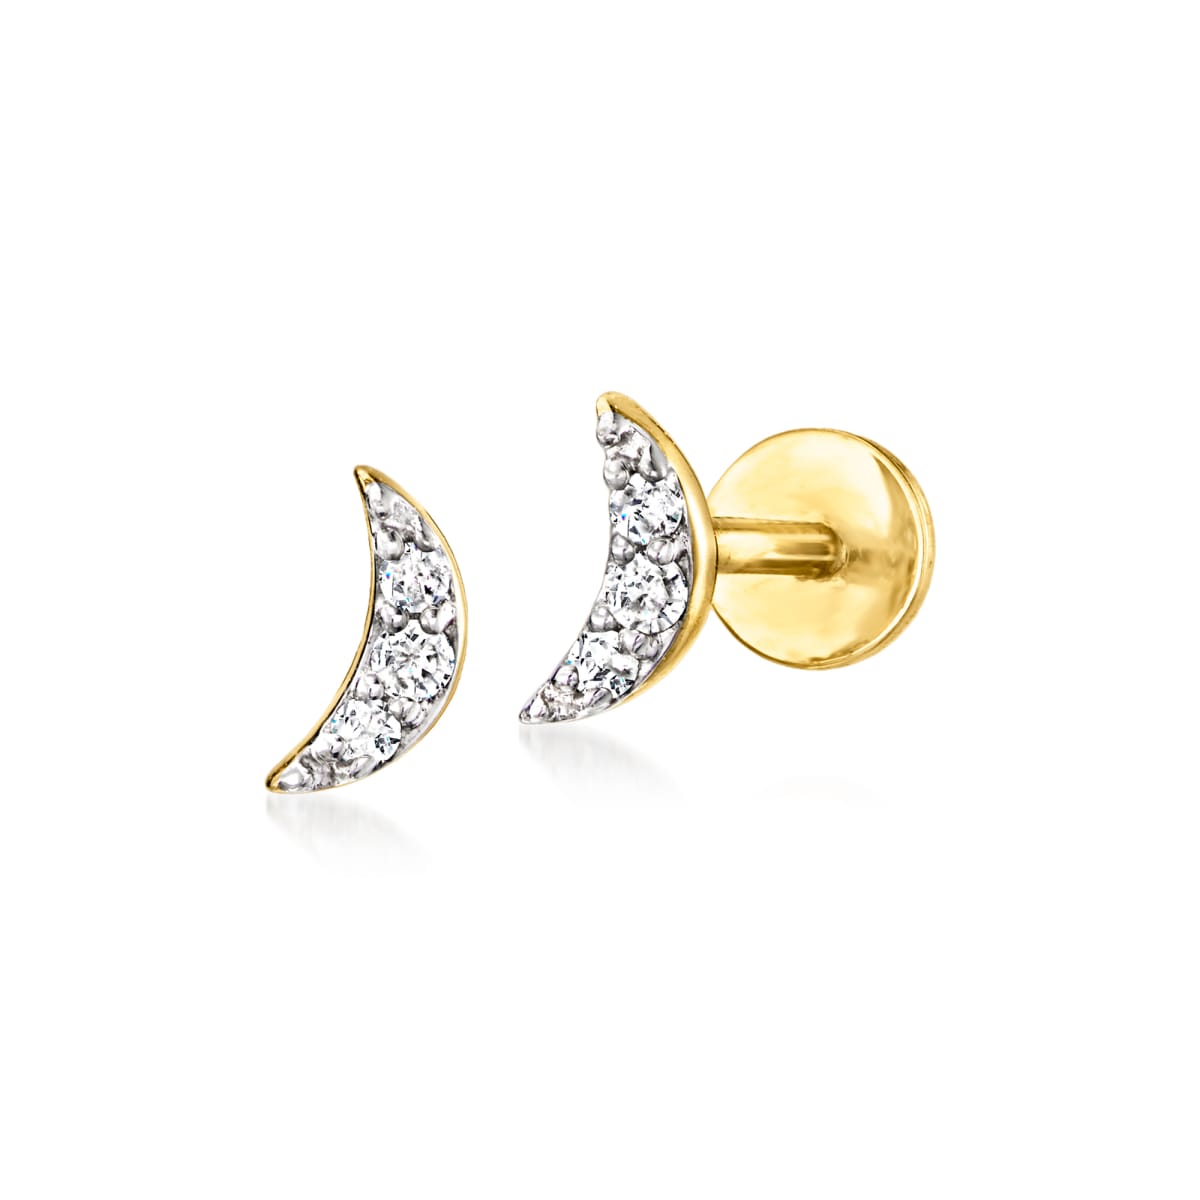 Diamond-Accented Moon Flat-Back Stud Earrings in 14kt Yellow Gold | Ross-Simons